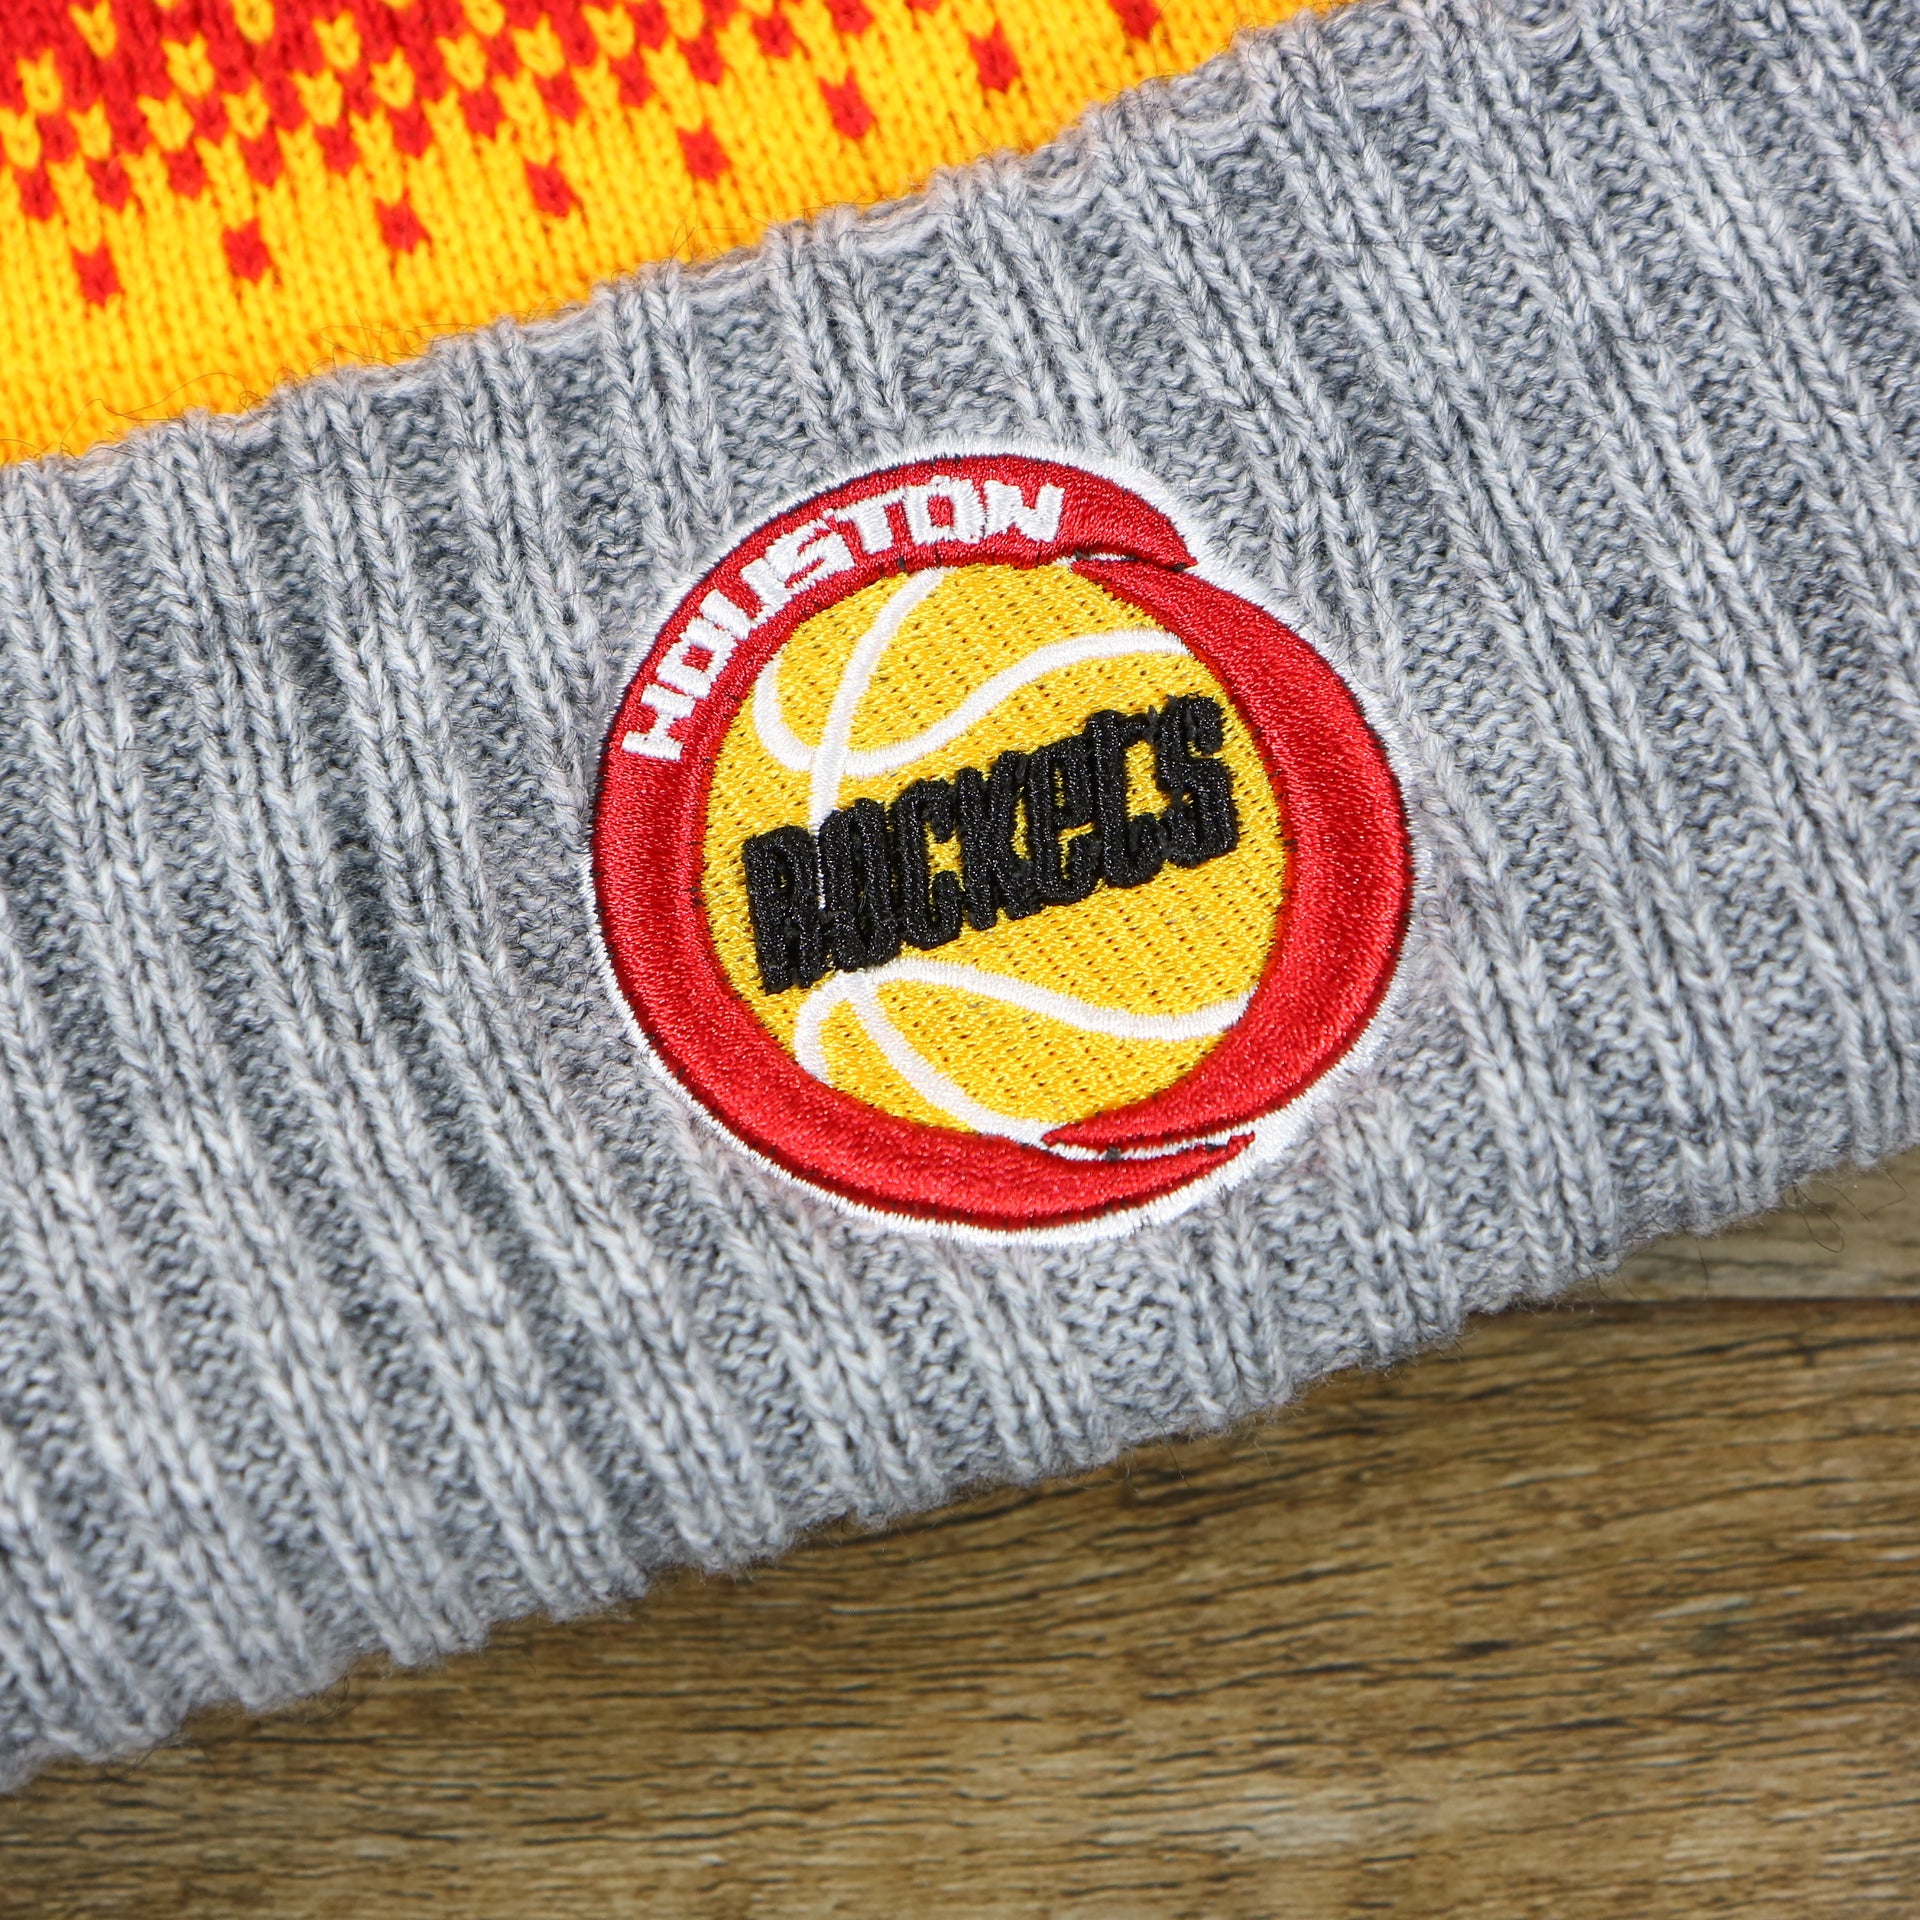 the Houston Rockets Logo on the Retro Houston Rockets Arctic Snowflake Ugly Sweater Pattern Cuffed Beanie With Pom Pom | Yellow, Maroon, and Gray Winter Beanie